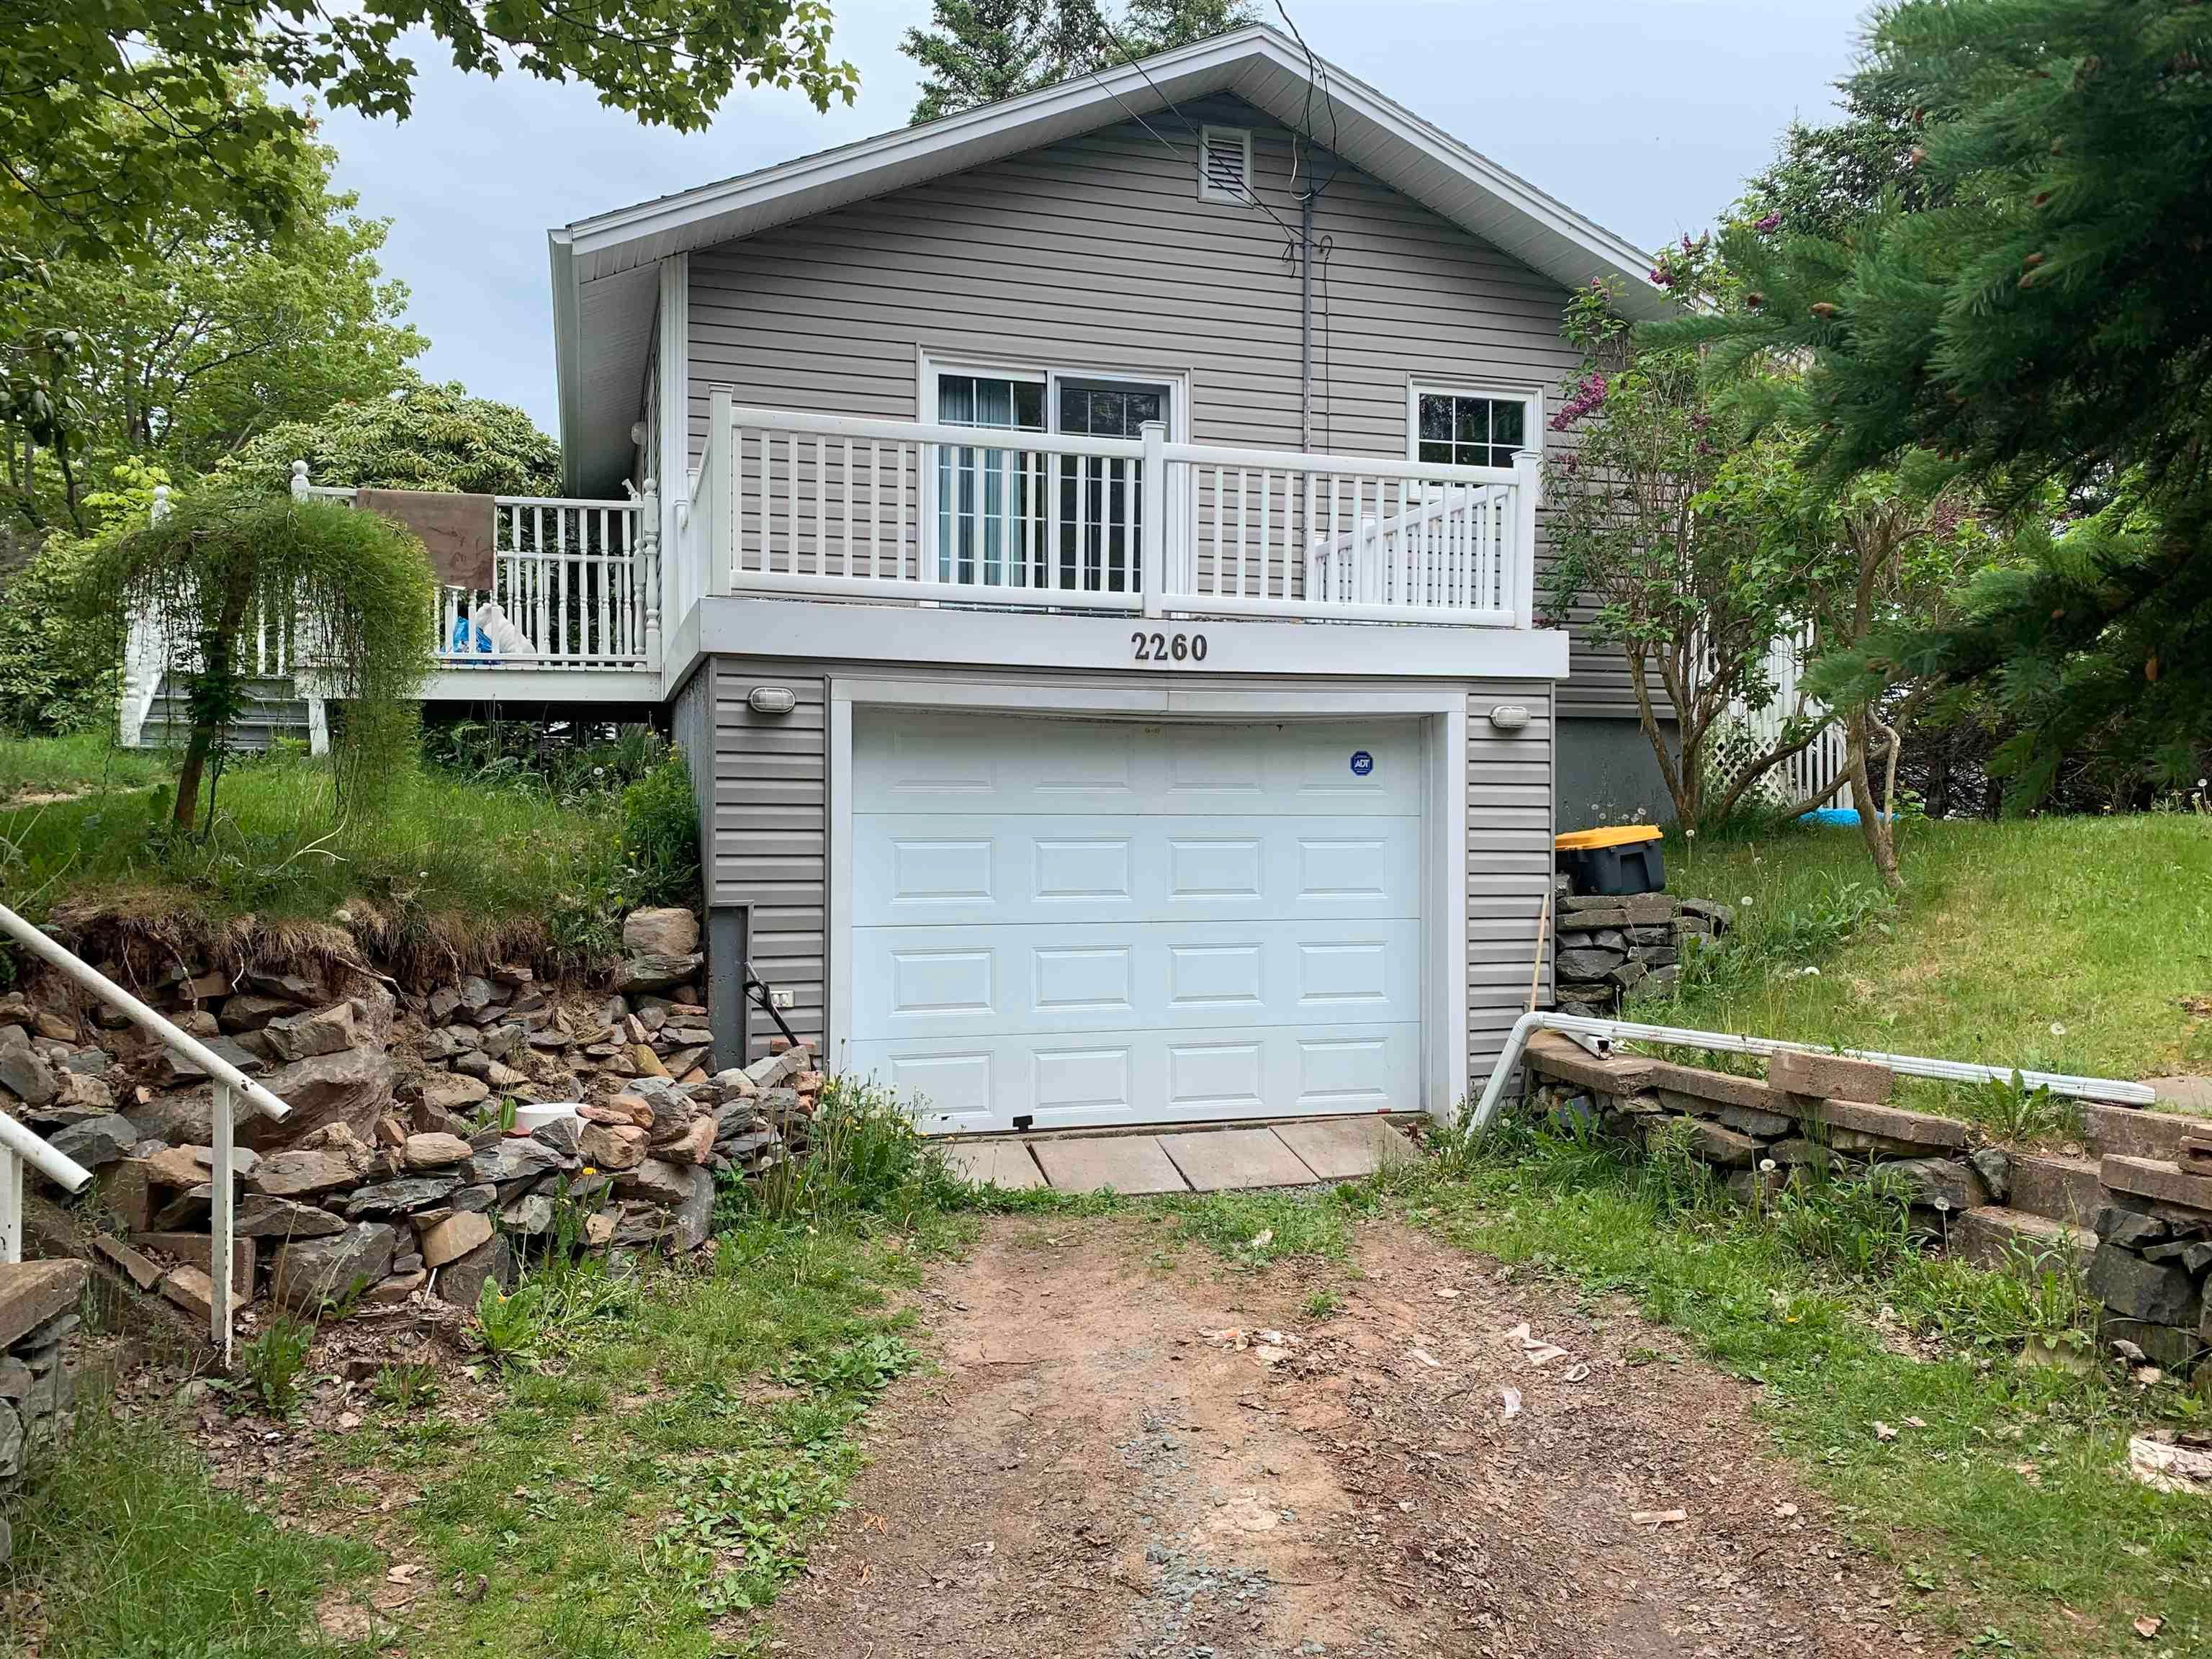 Main Photo: 2260 Lawrencetown Road in Lawrencetown: 31-Lawrencetown, Lake Echo, Port Residential for sale (Halifax-Dartmouth)  : MLS®# 202213363